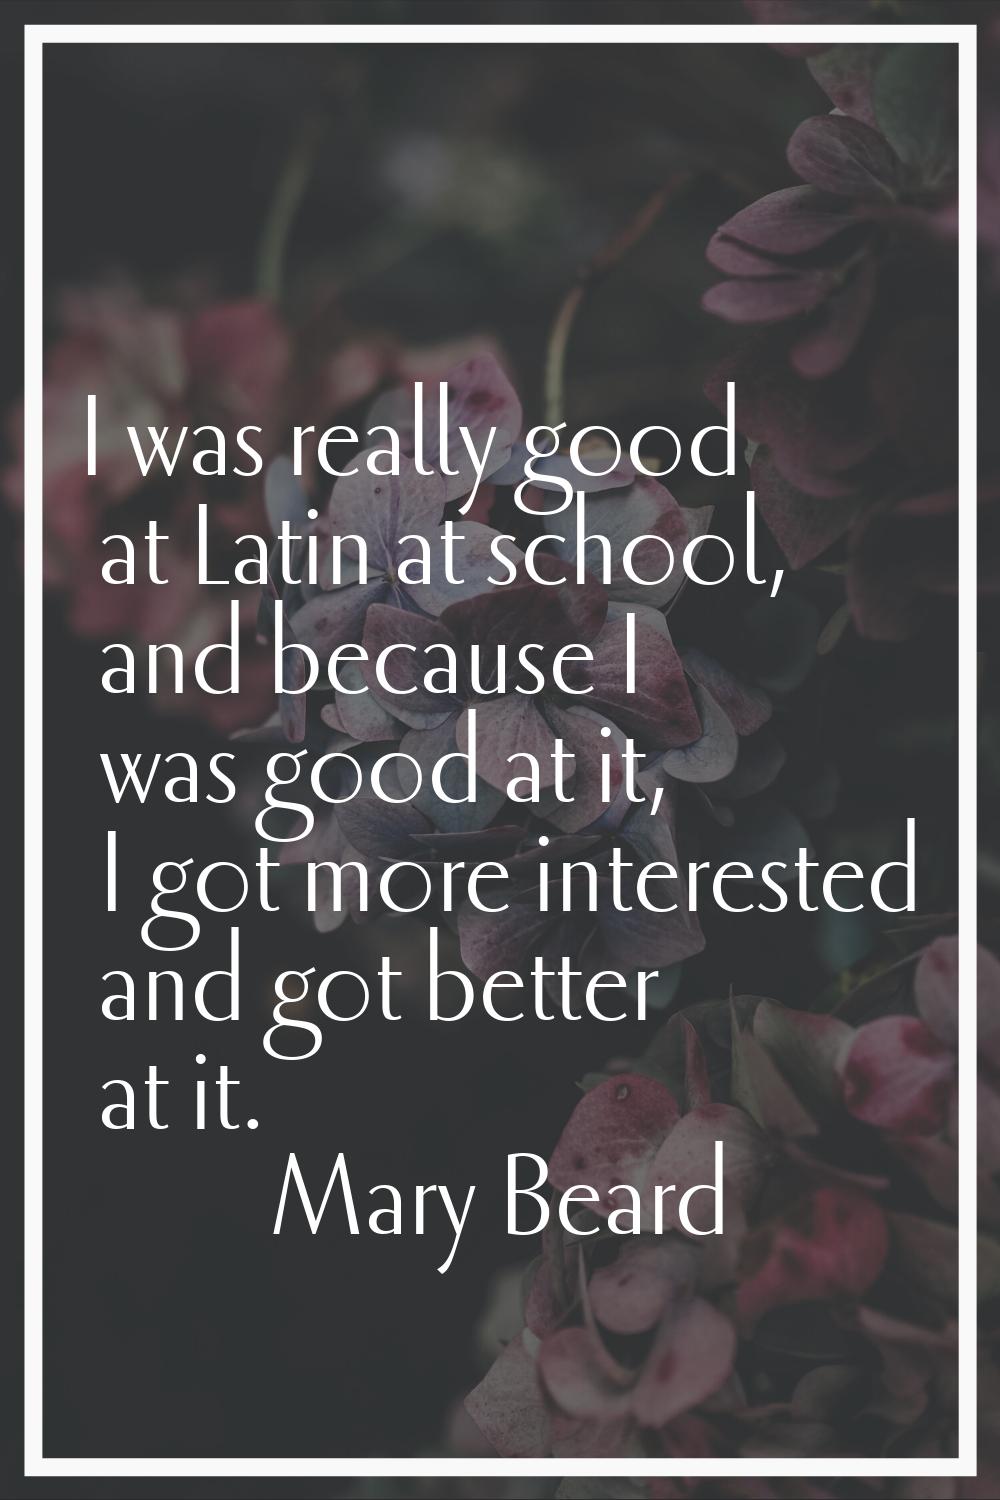 I was really good at Latin at school, and because I was good at it, I got more interested and got b